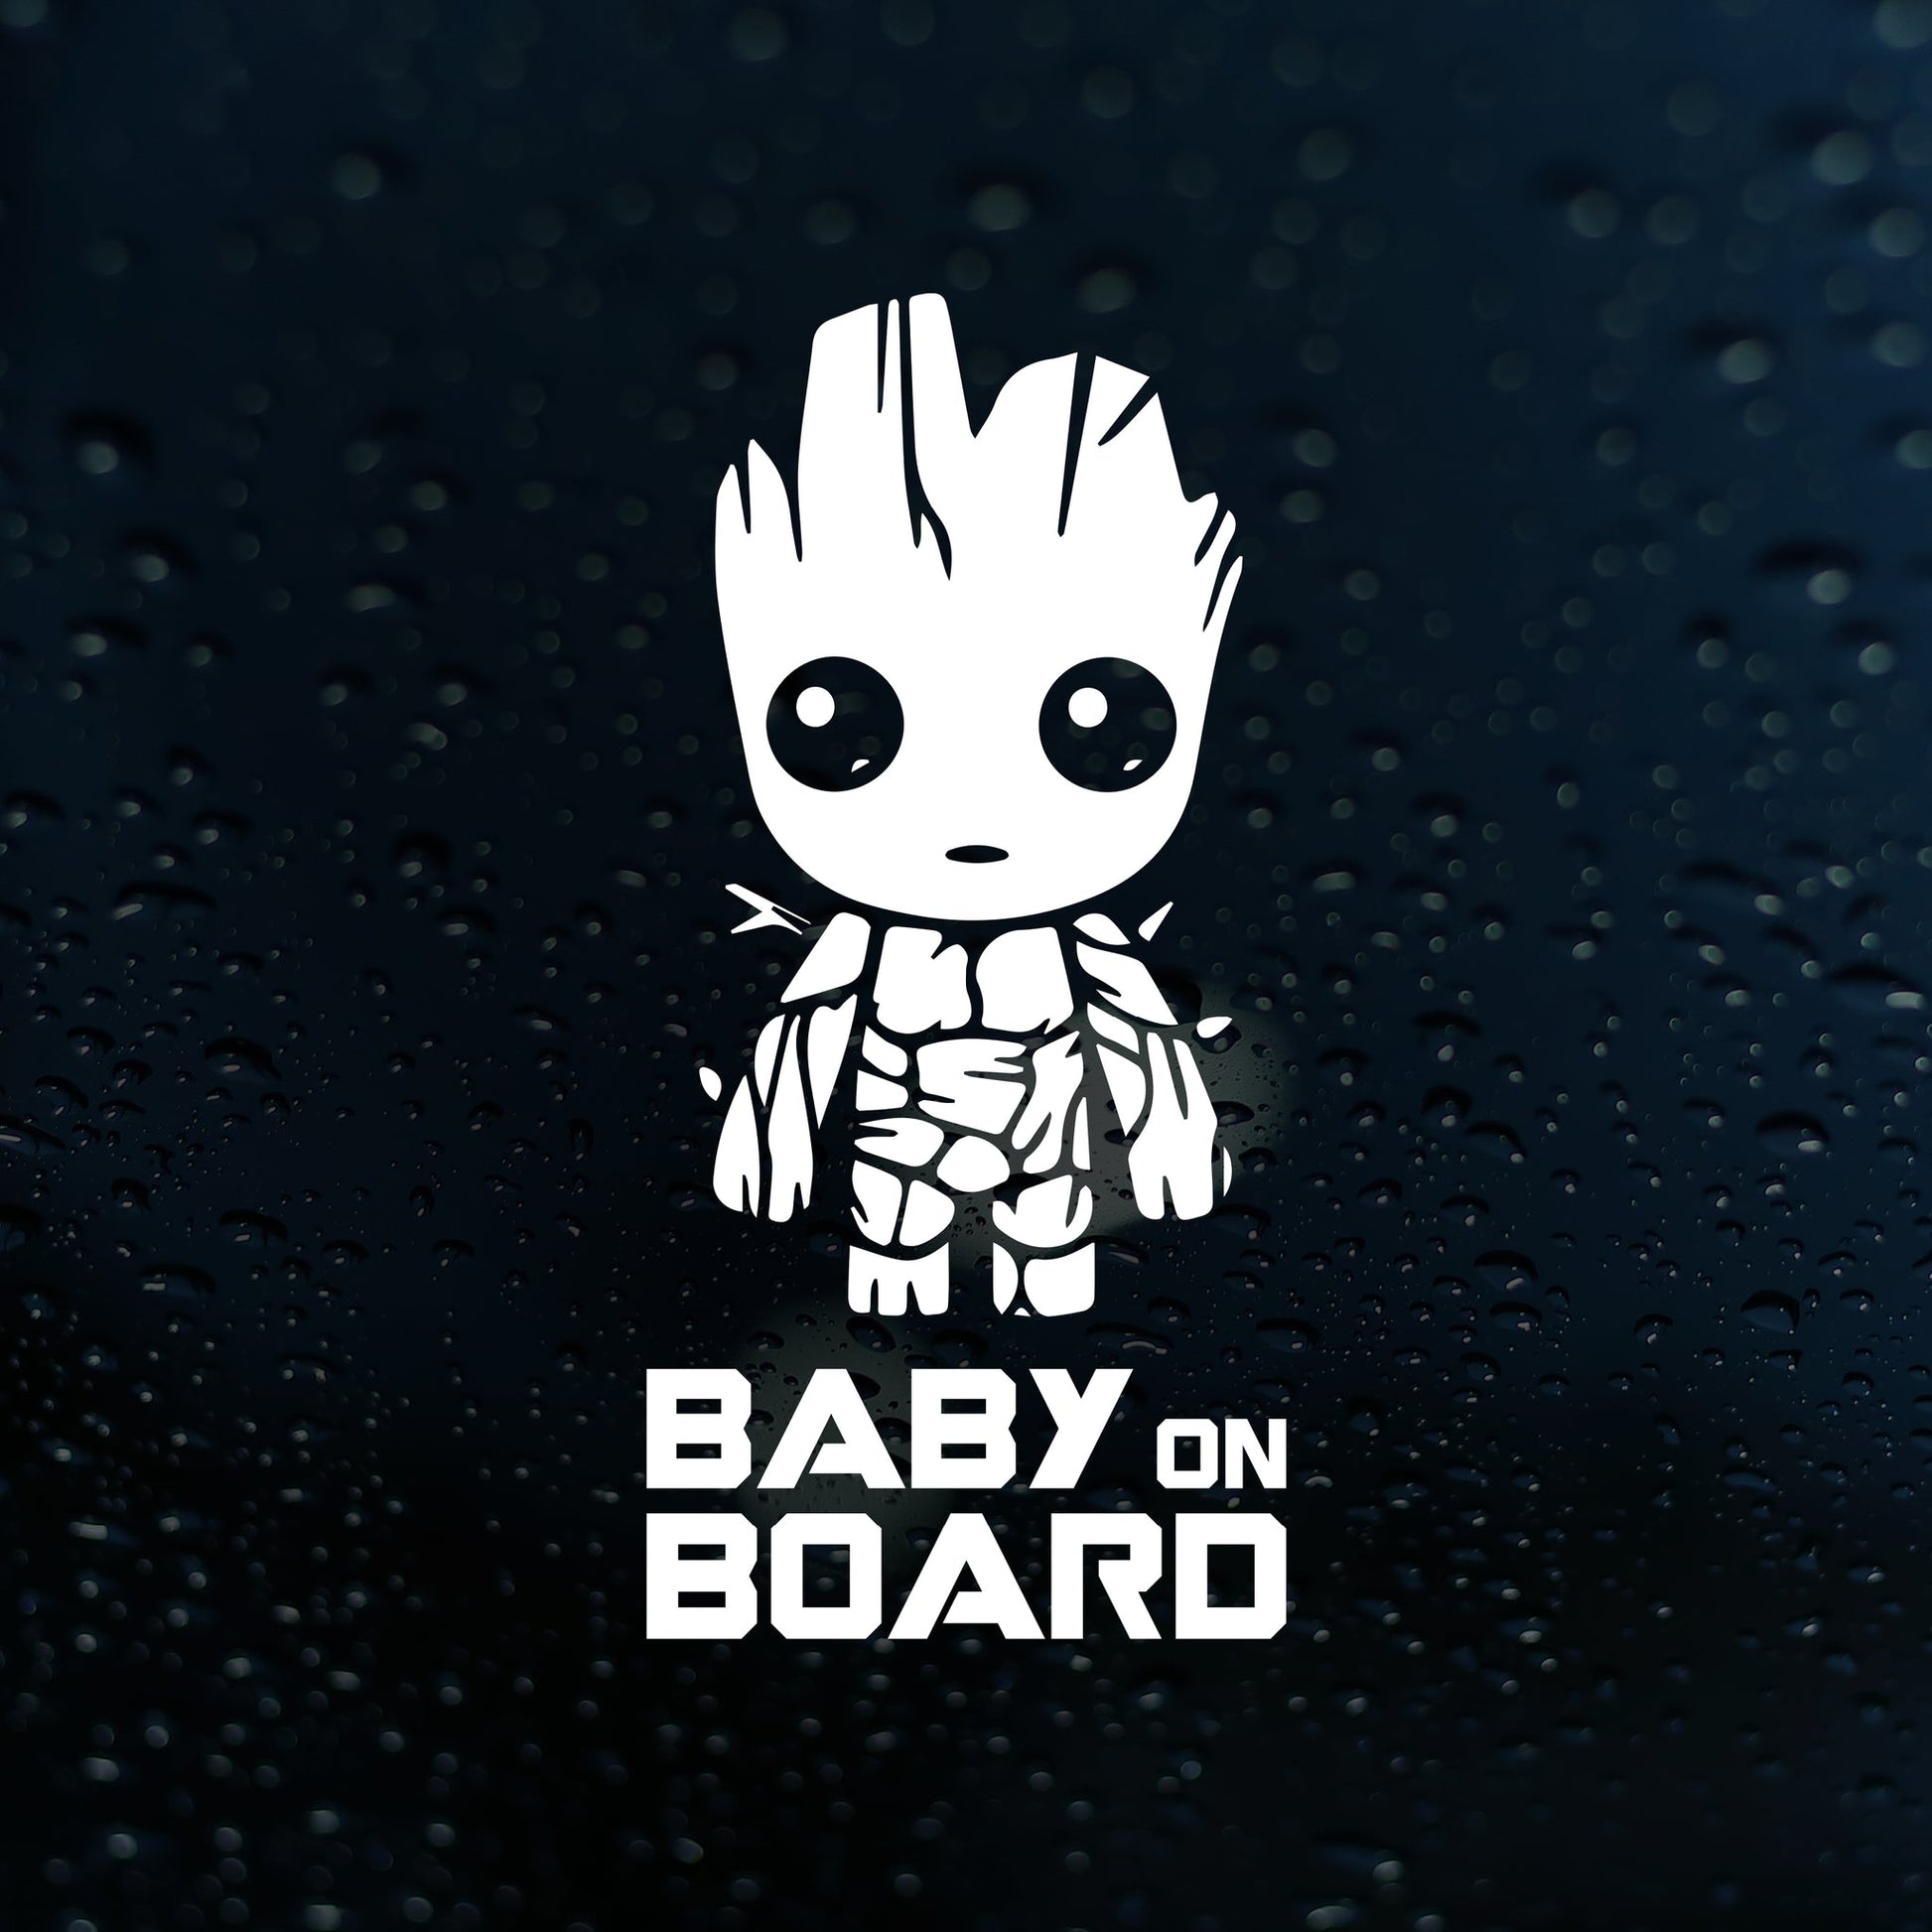 Baby Groot on Board - Vehicle Decal Sticker Design